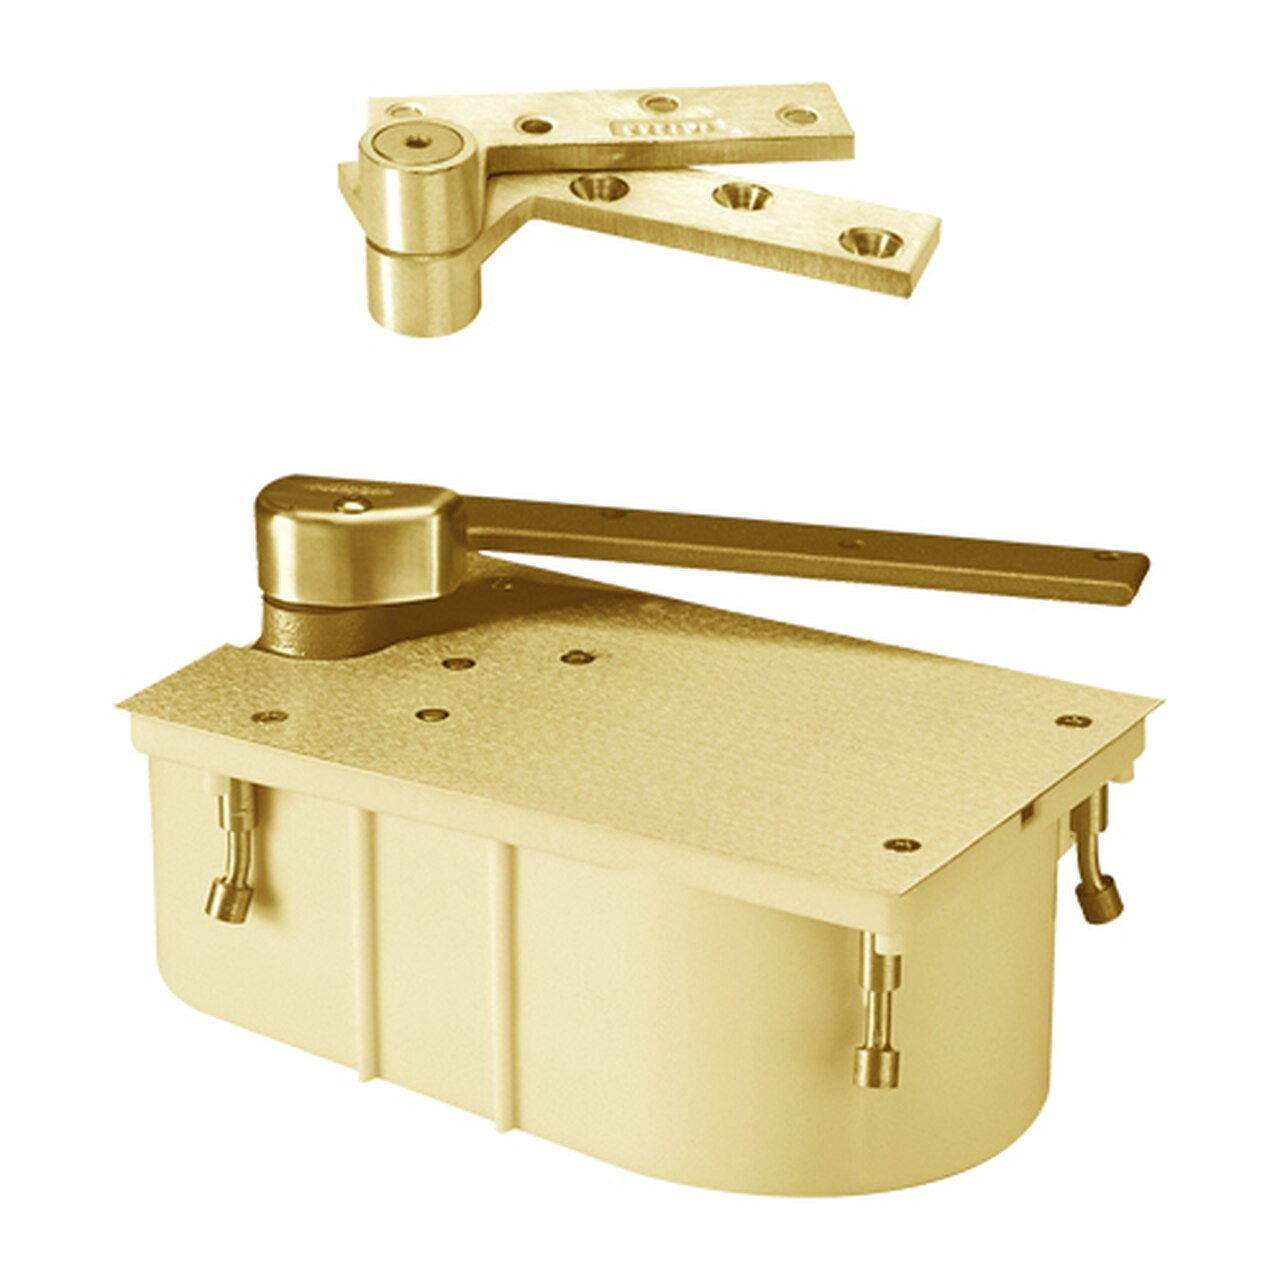 F27-95N-LFP-LCC-LH-605 Rixson 27 Series Fire Rated Heavy Duty 3/4" Offset Hung Floor Closer in Bright Brass Finish